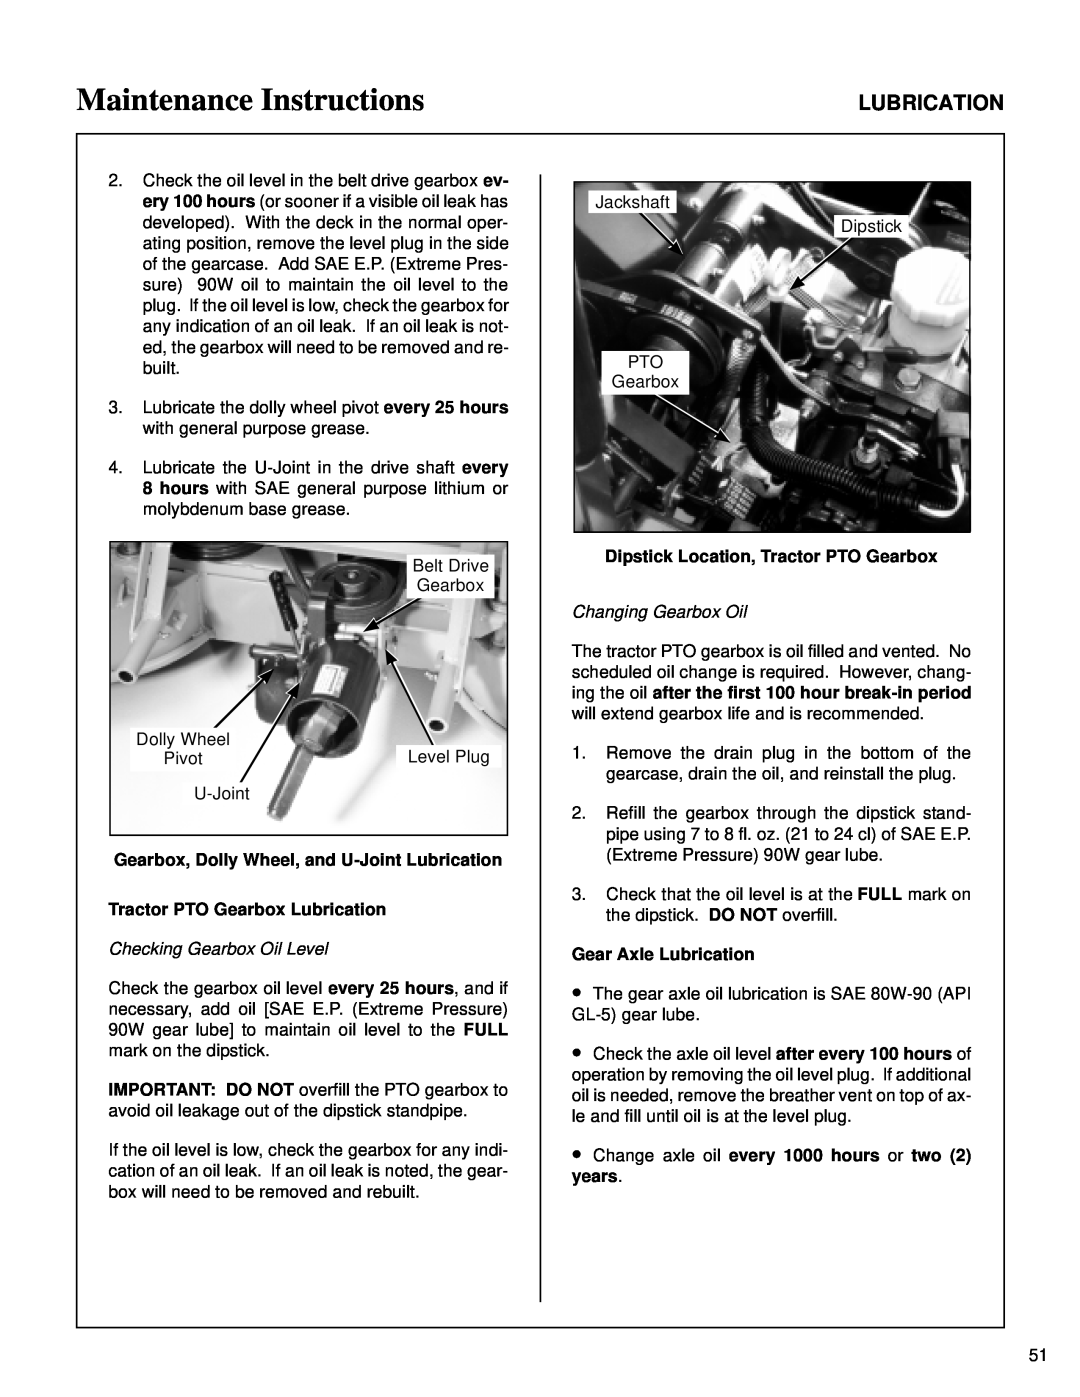 Walker MT Maintenance Instructions, Gearbox, Dolly Wheel, and U-Joint Lubrication, Tractor PTO Gearbox Lubrication 